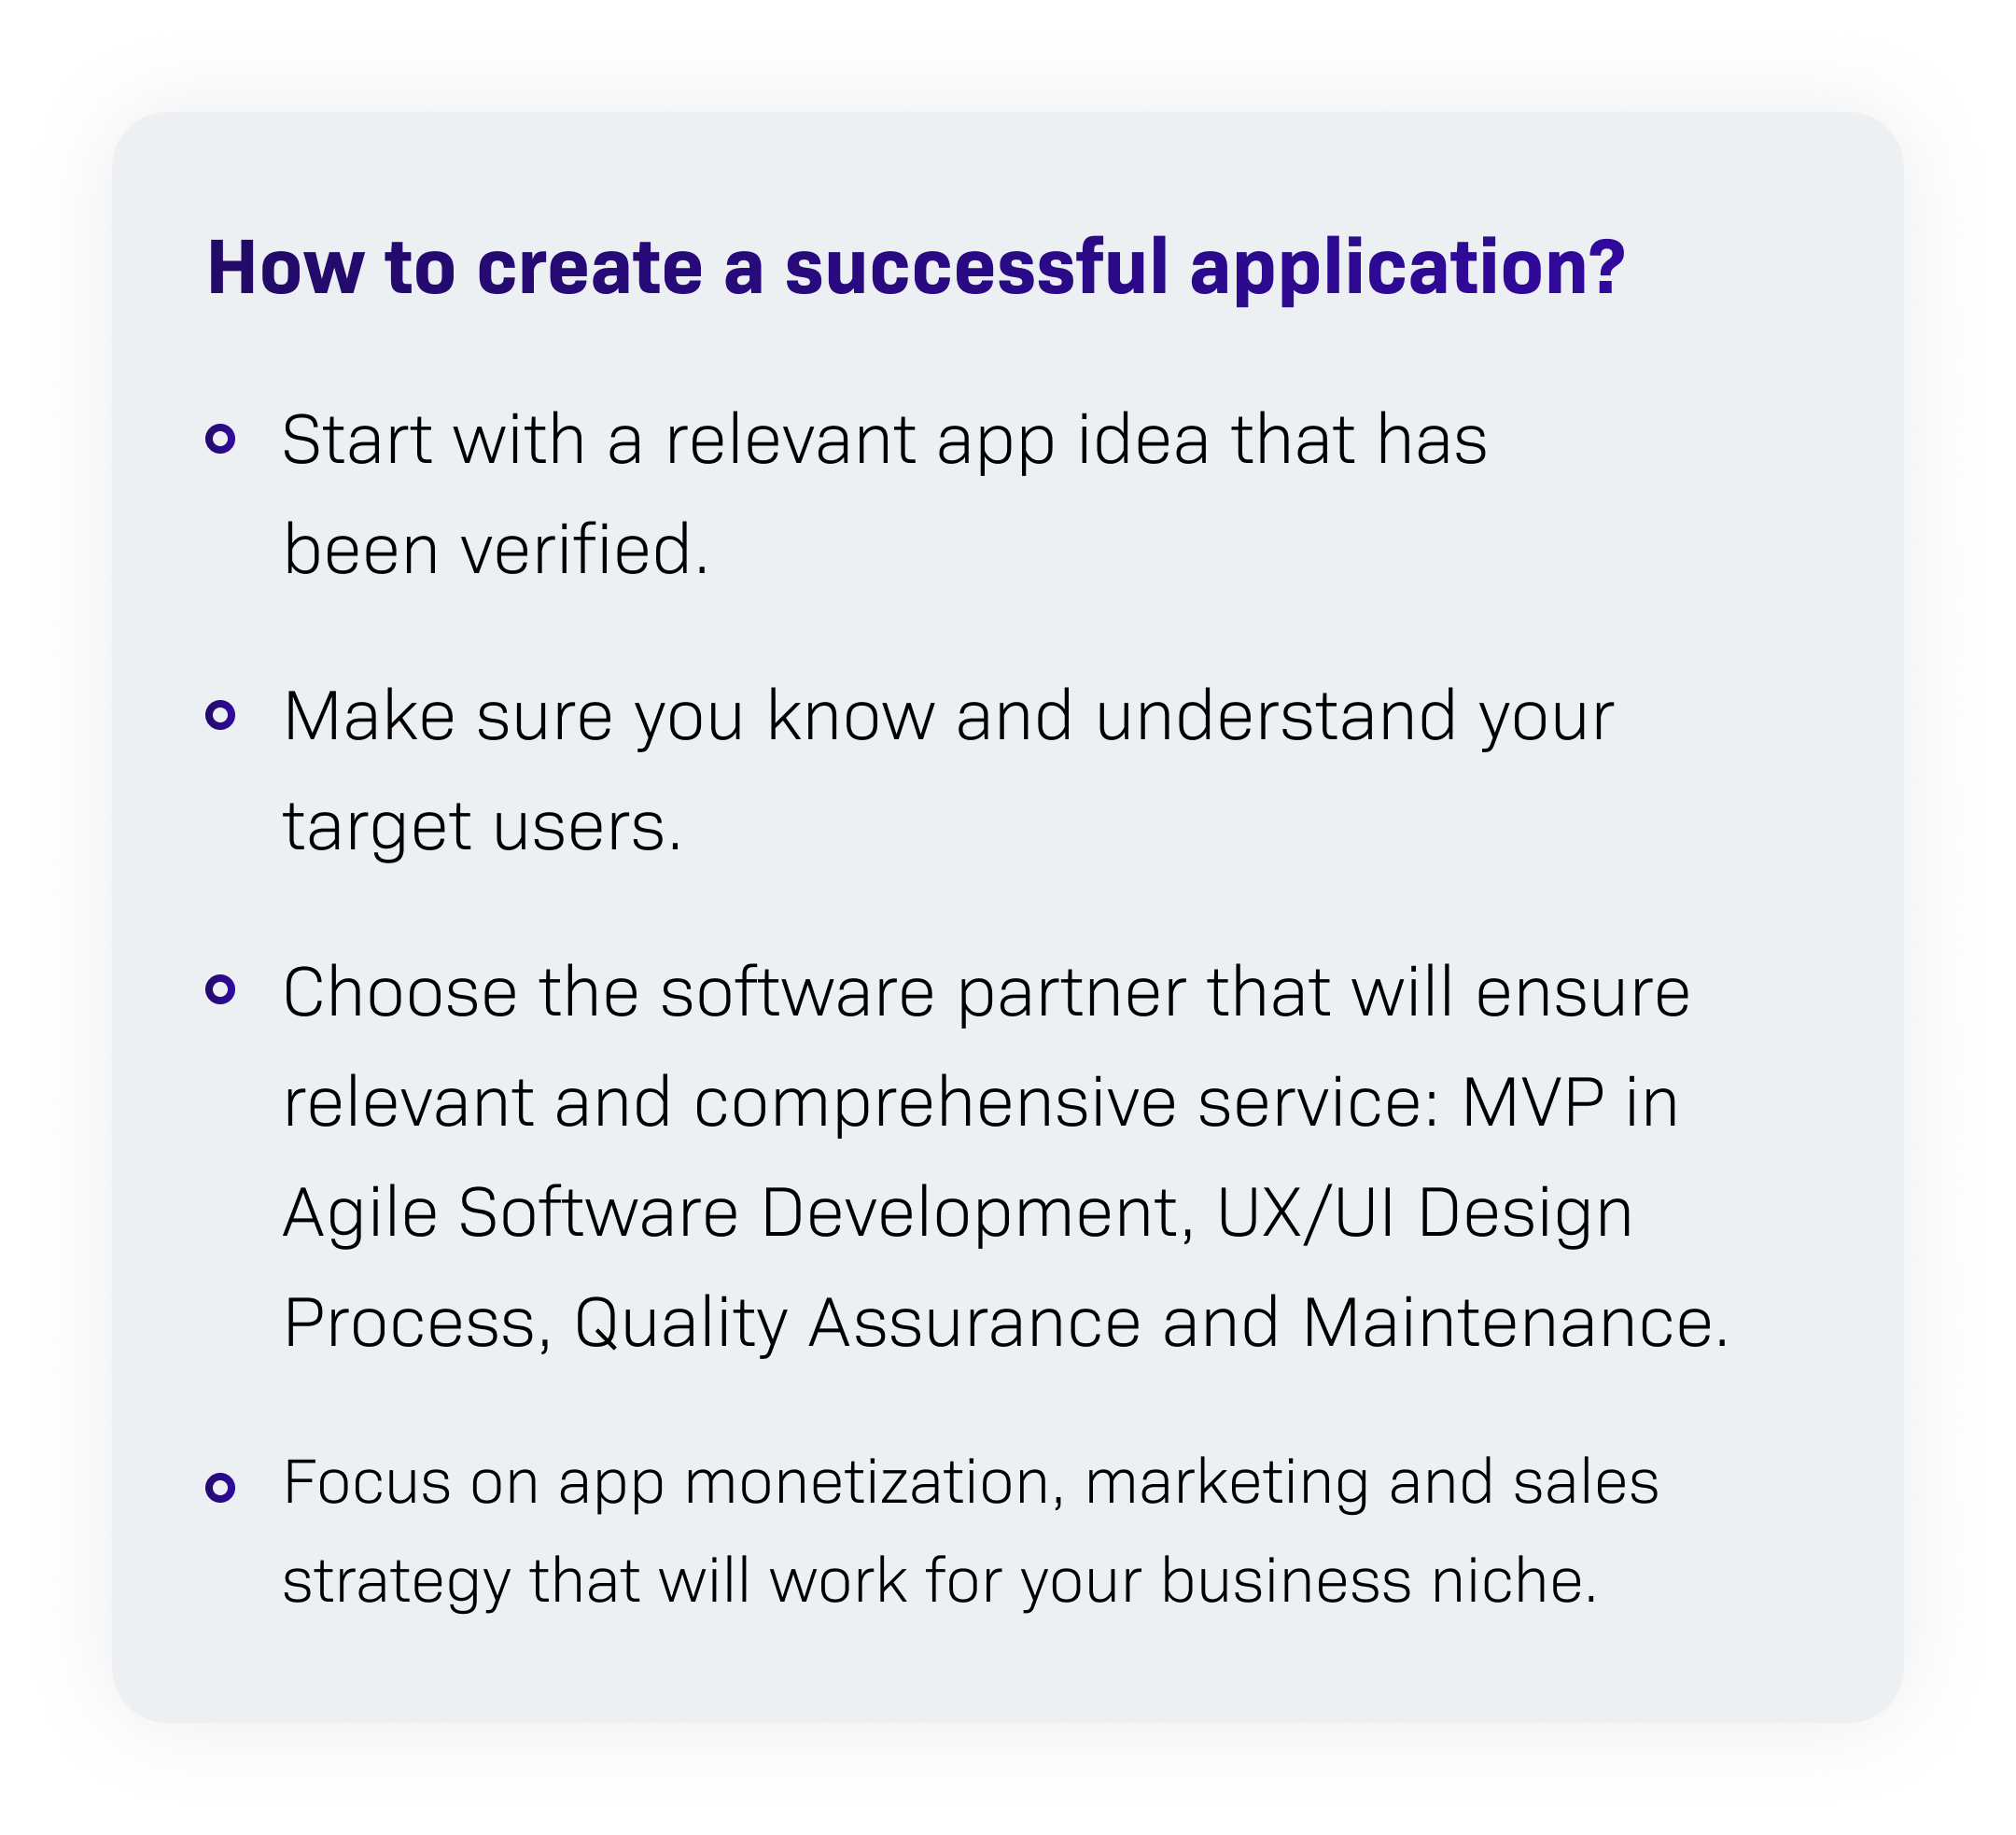 How to create a successful application 3